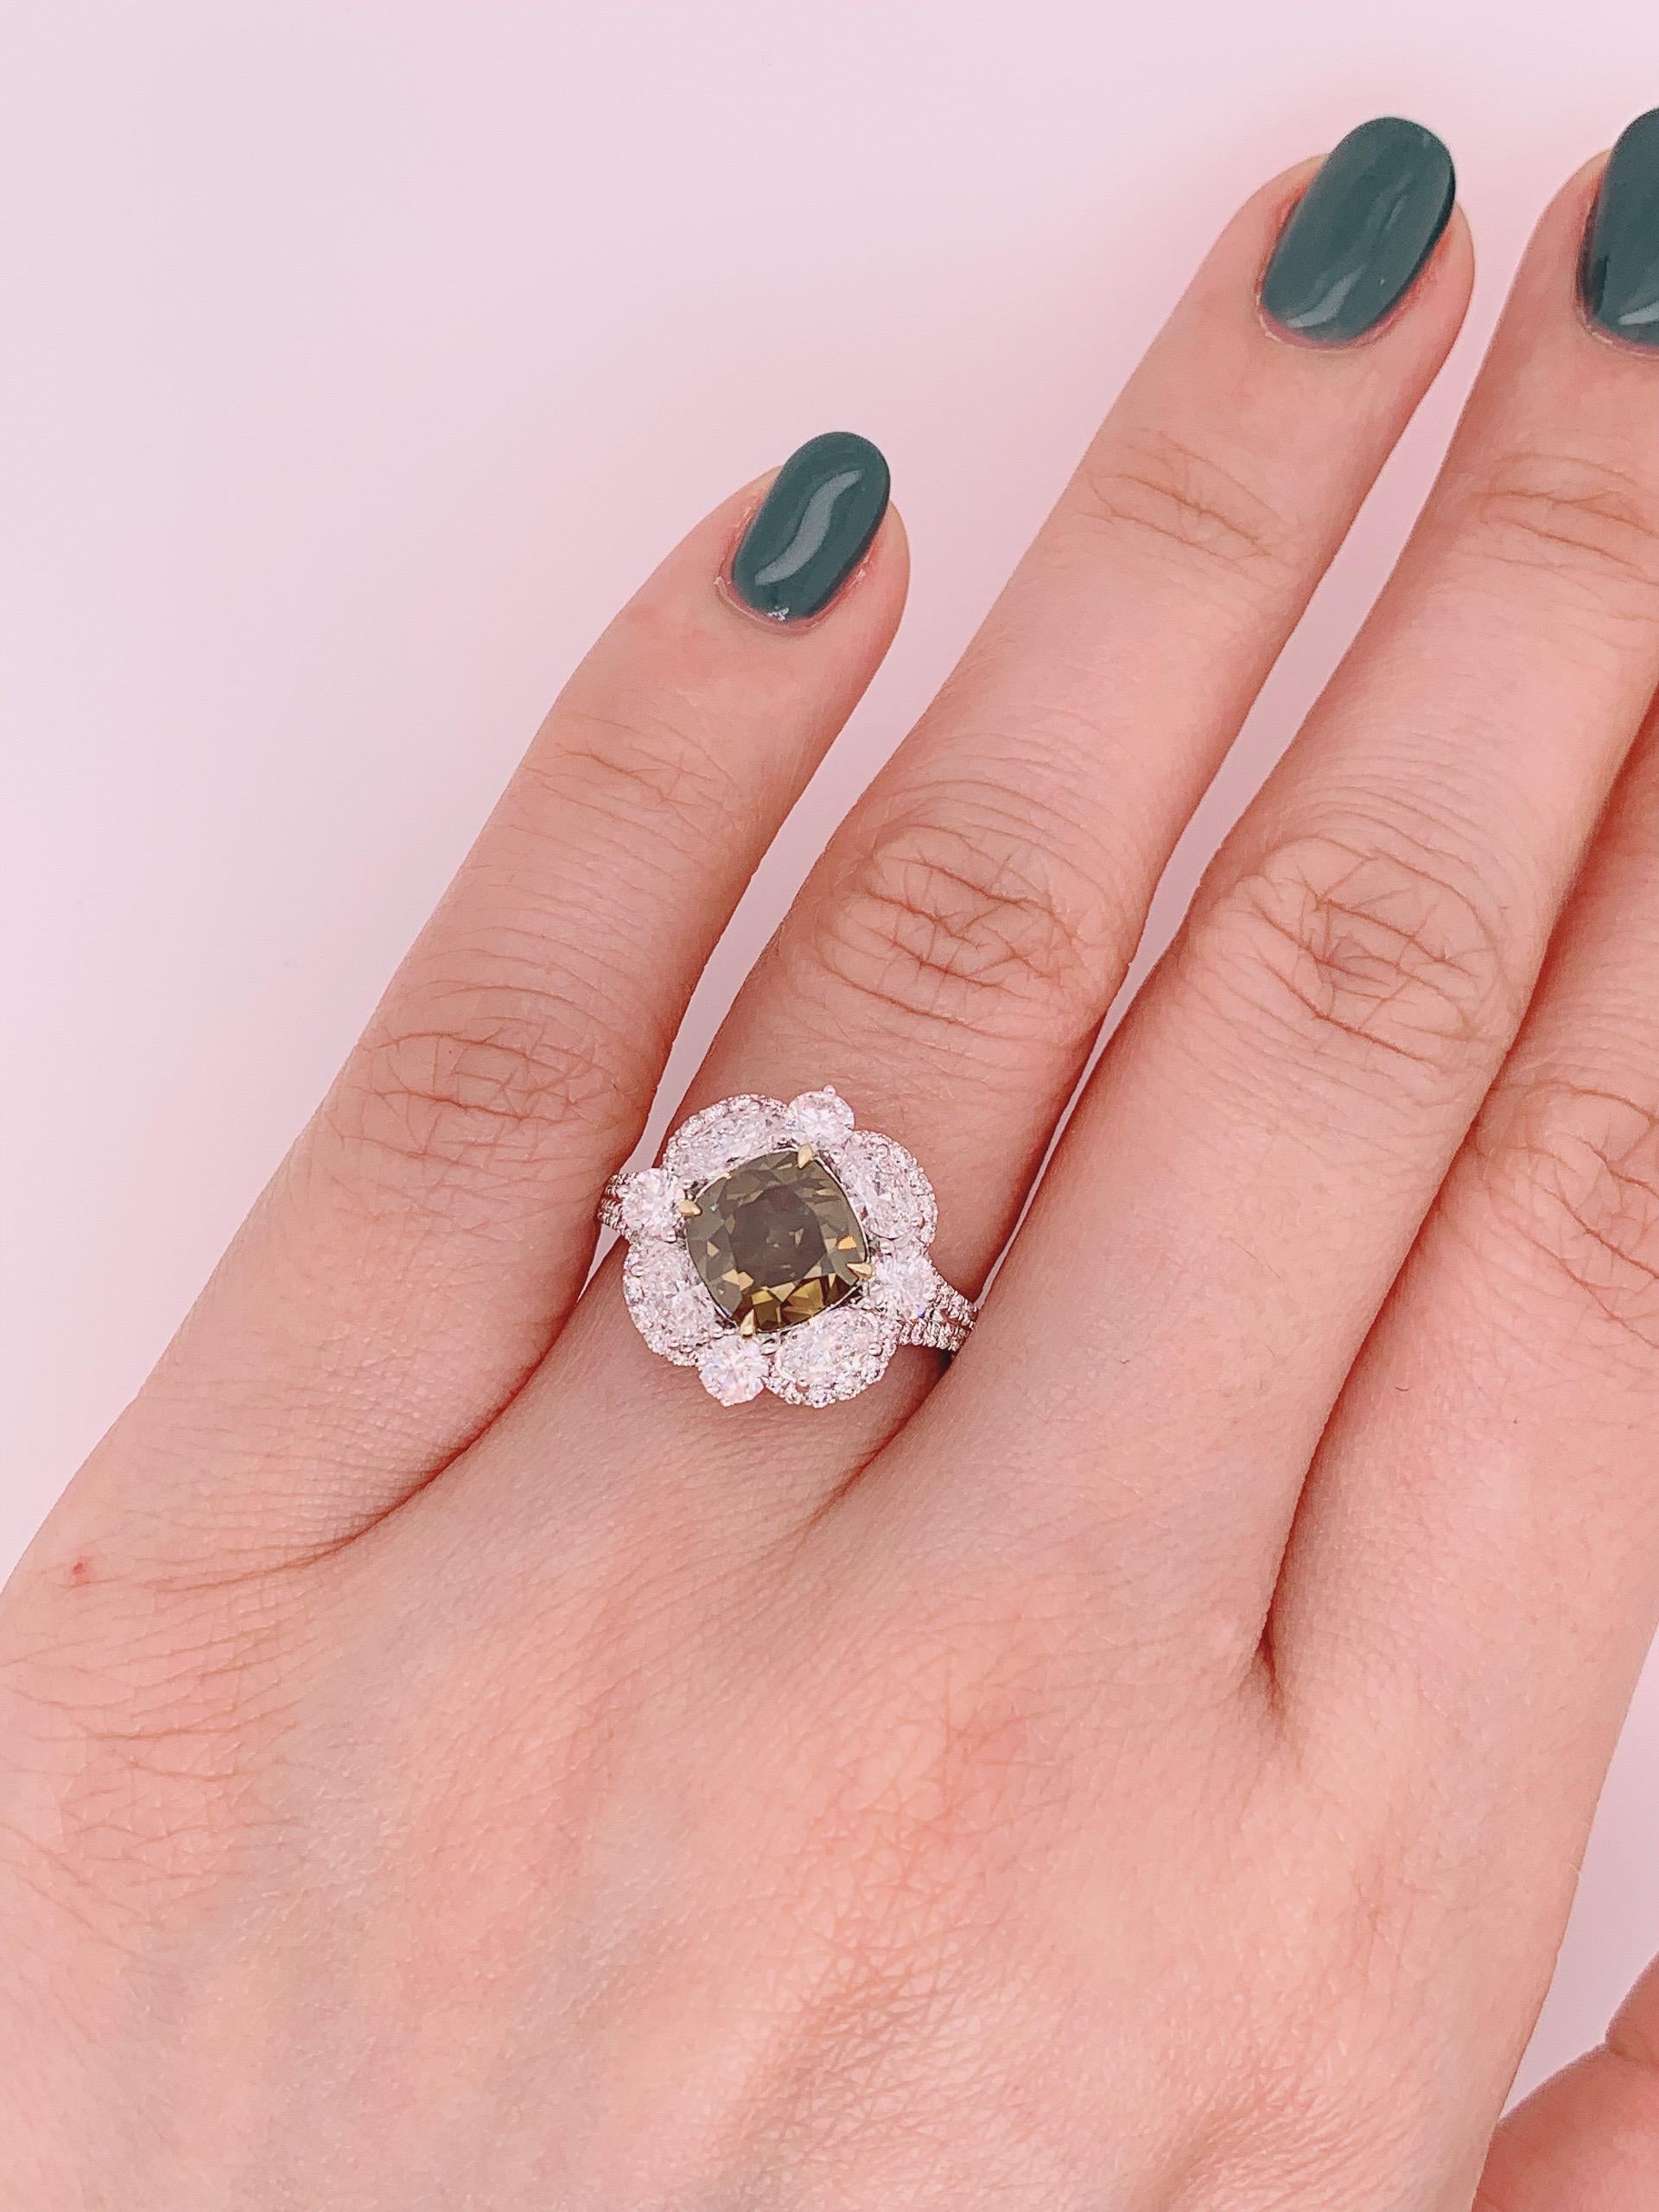 Featuring a 3.02 carat Fancy dark brown-greenish yellow Diamond Ring  , with white oval shape diamond. Finished in white gold. 

Center stone certified by worldwide known GIA institution. (5141874278)

Ring size- US 6.5. Kahn also provides